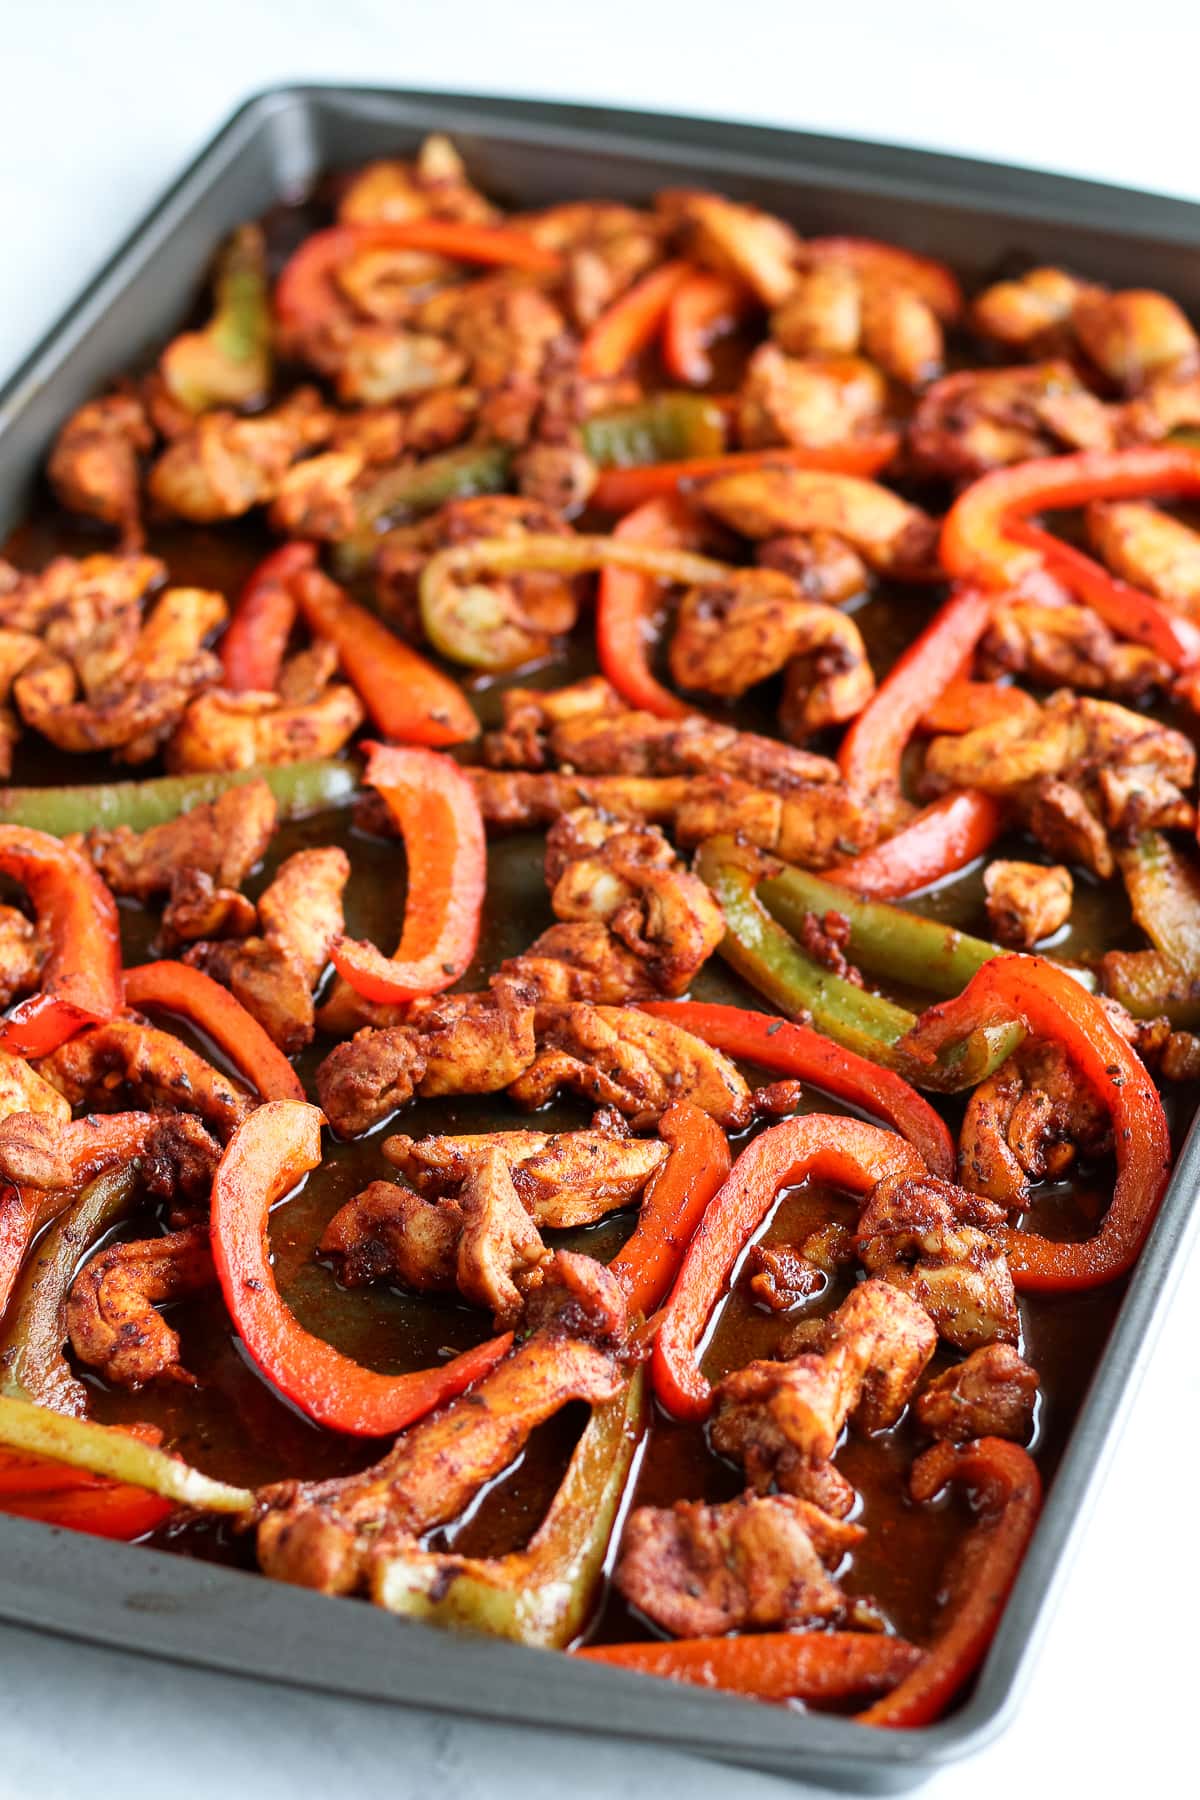 A sheet pan filled with baked chicken thigh slices and sliced red and green bell peppers.